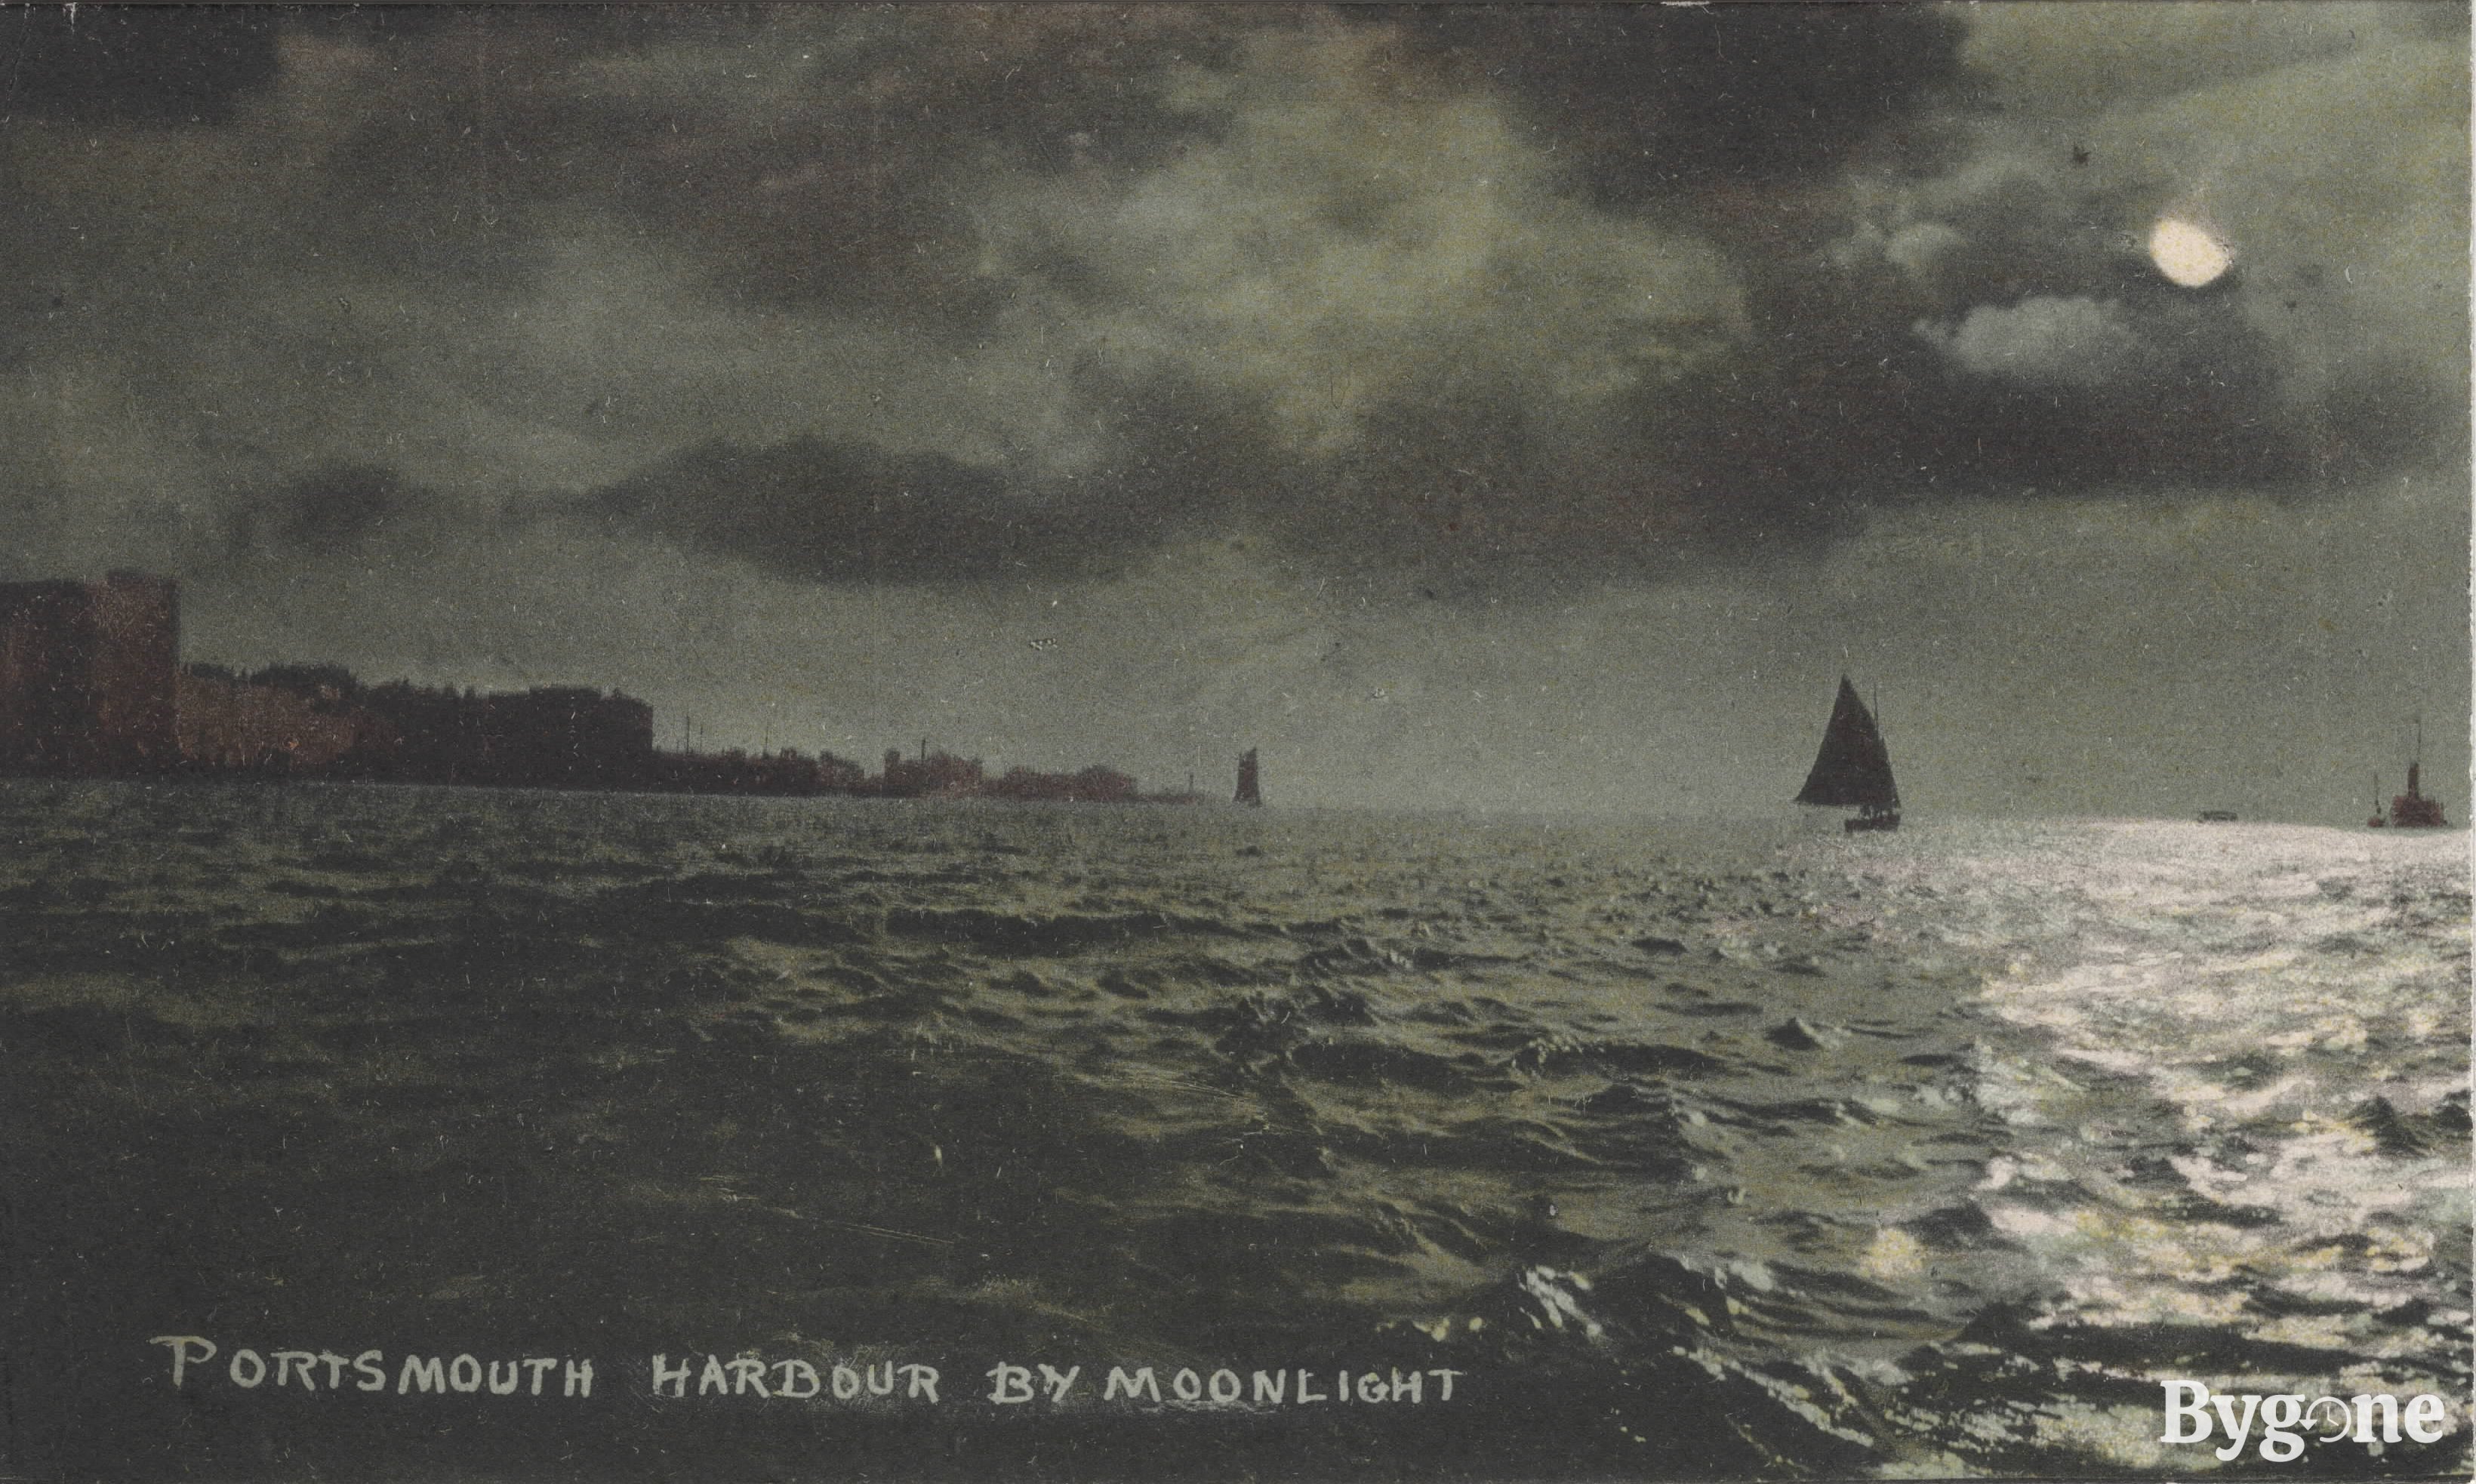 Portsmouth Harbour by Moonlight. Circa early 1900s.